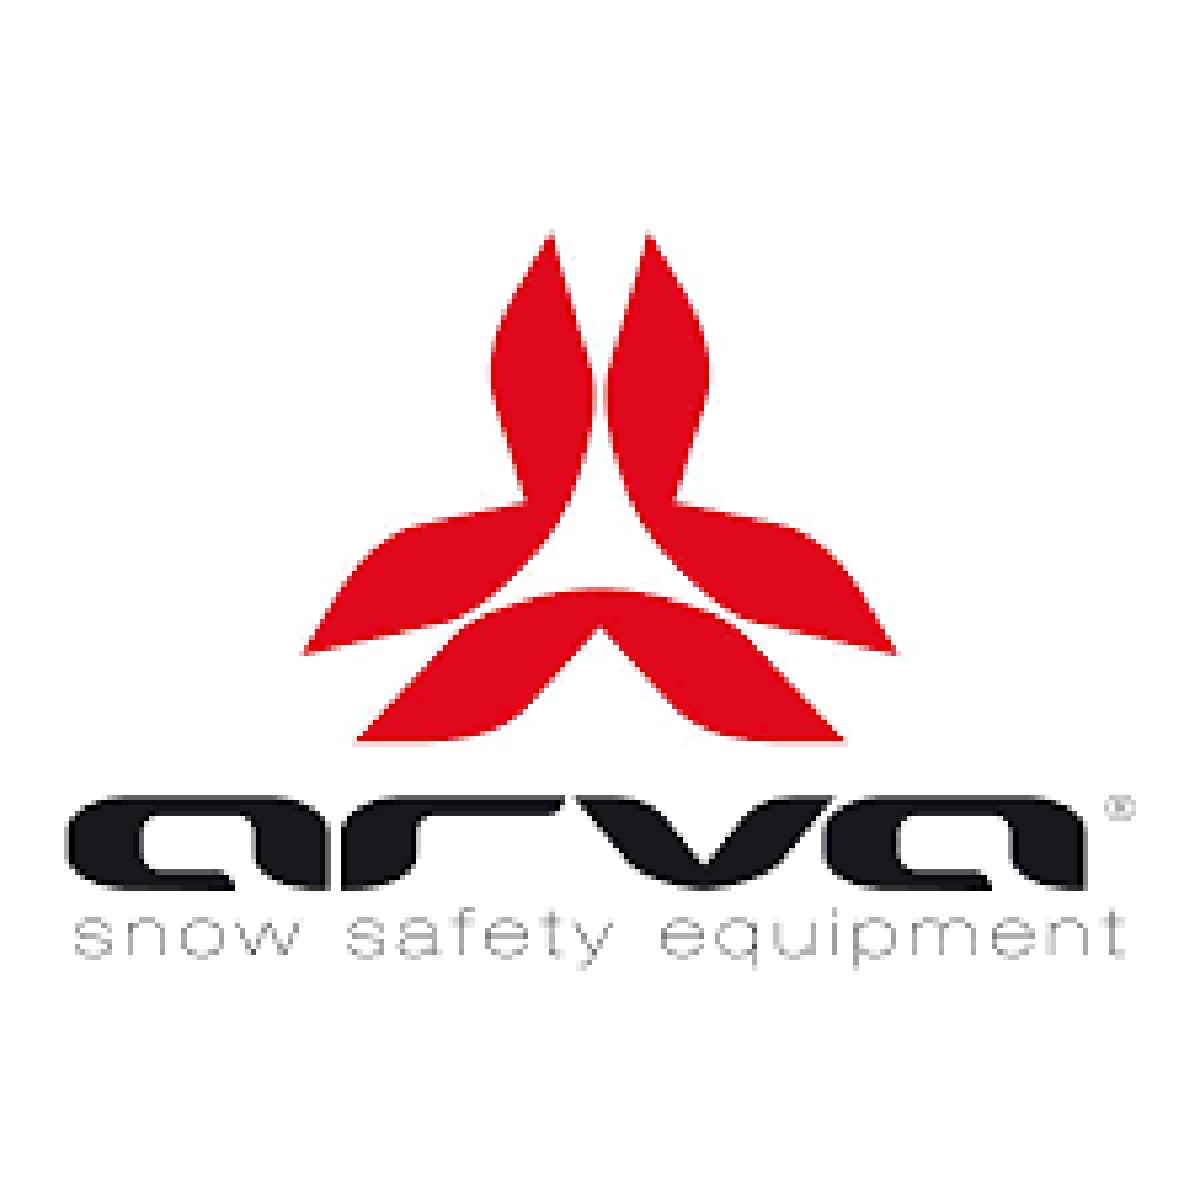 https://glacierskishop.com/collections/arva/products/arva-neo-pro-avalanche-transceiver-2021